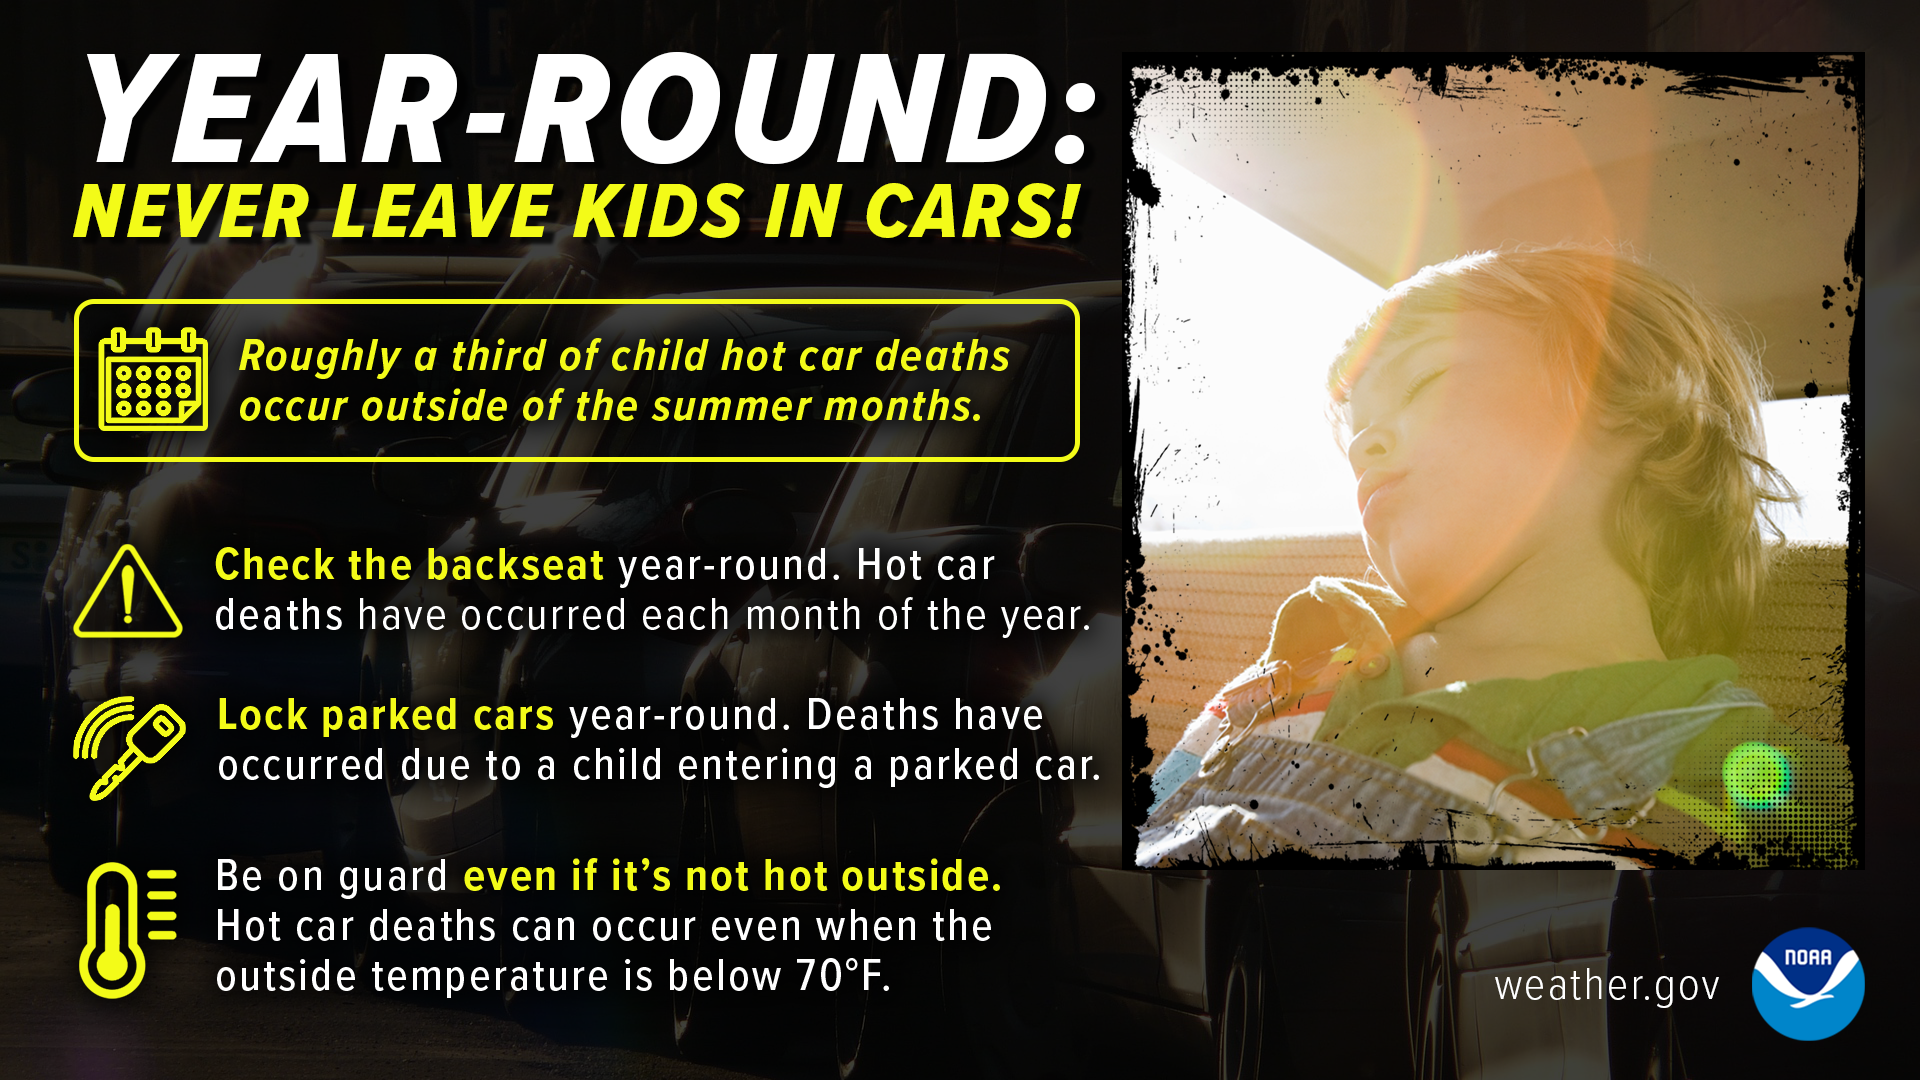 Year-round, never leave kids in cars! Roughly a third of child hot car deaths occur outside of the summer months. Check the backseat year-round. Hot car deaths have occurred each month of the year. Lock parked cars year-round. Deaths have occurred due to a child entering a parked car. Be on guard even if it's not hot outside. Hot car deaths can occur even when the outside temperature is below 70Â°F.